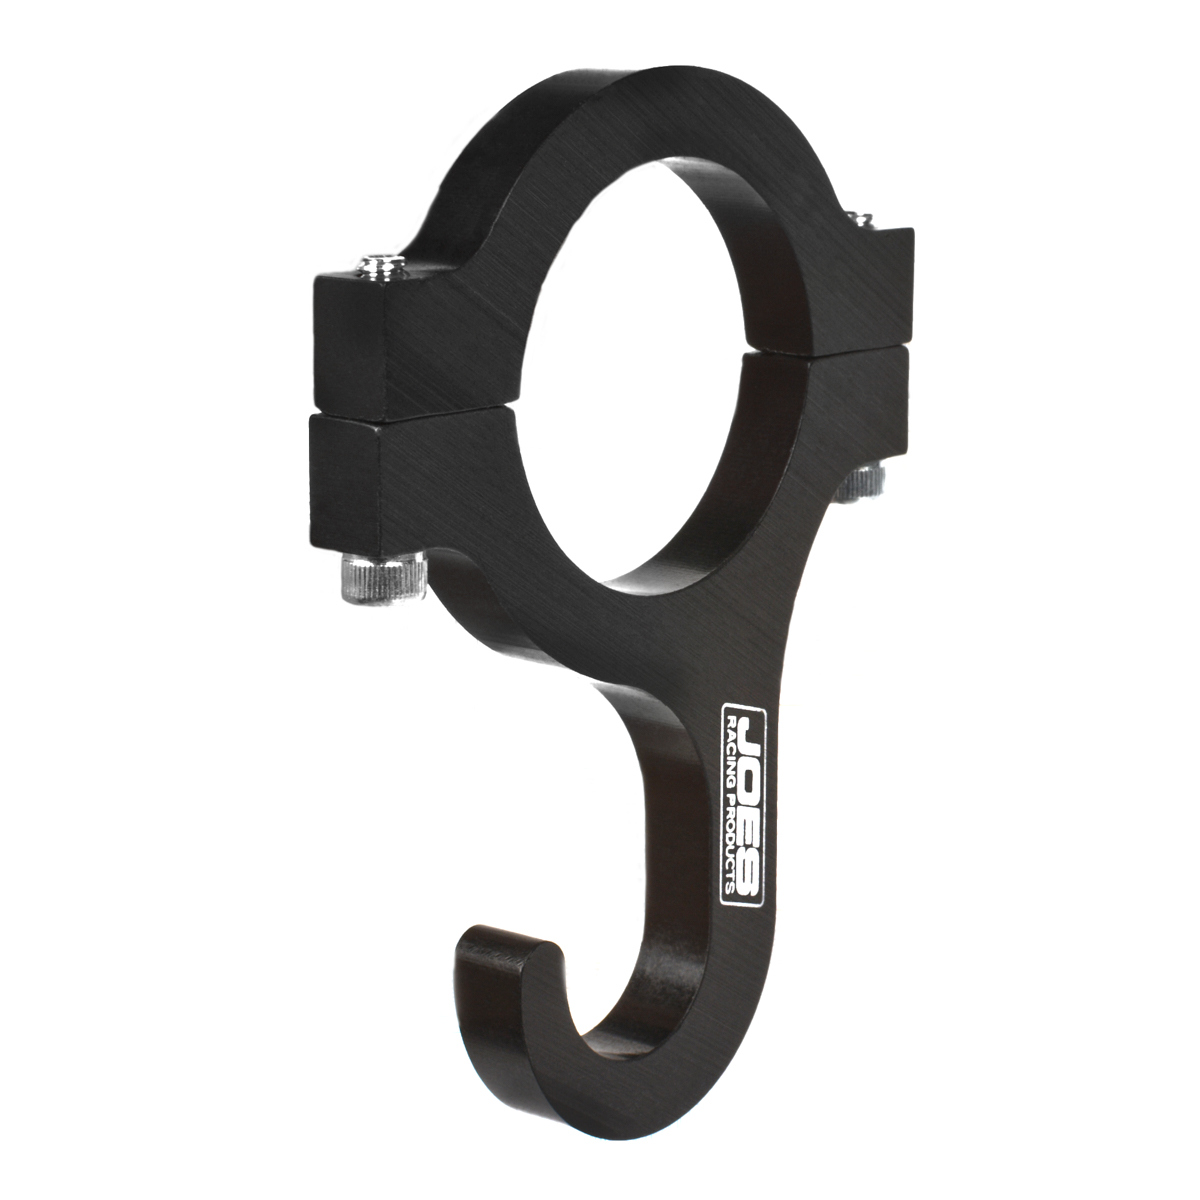 Joes Racing Products 10600-B Helmet Hook, Clamp-On, Aluminum, Black Anodized, 1 in OD Tube, Each